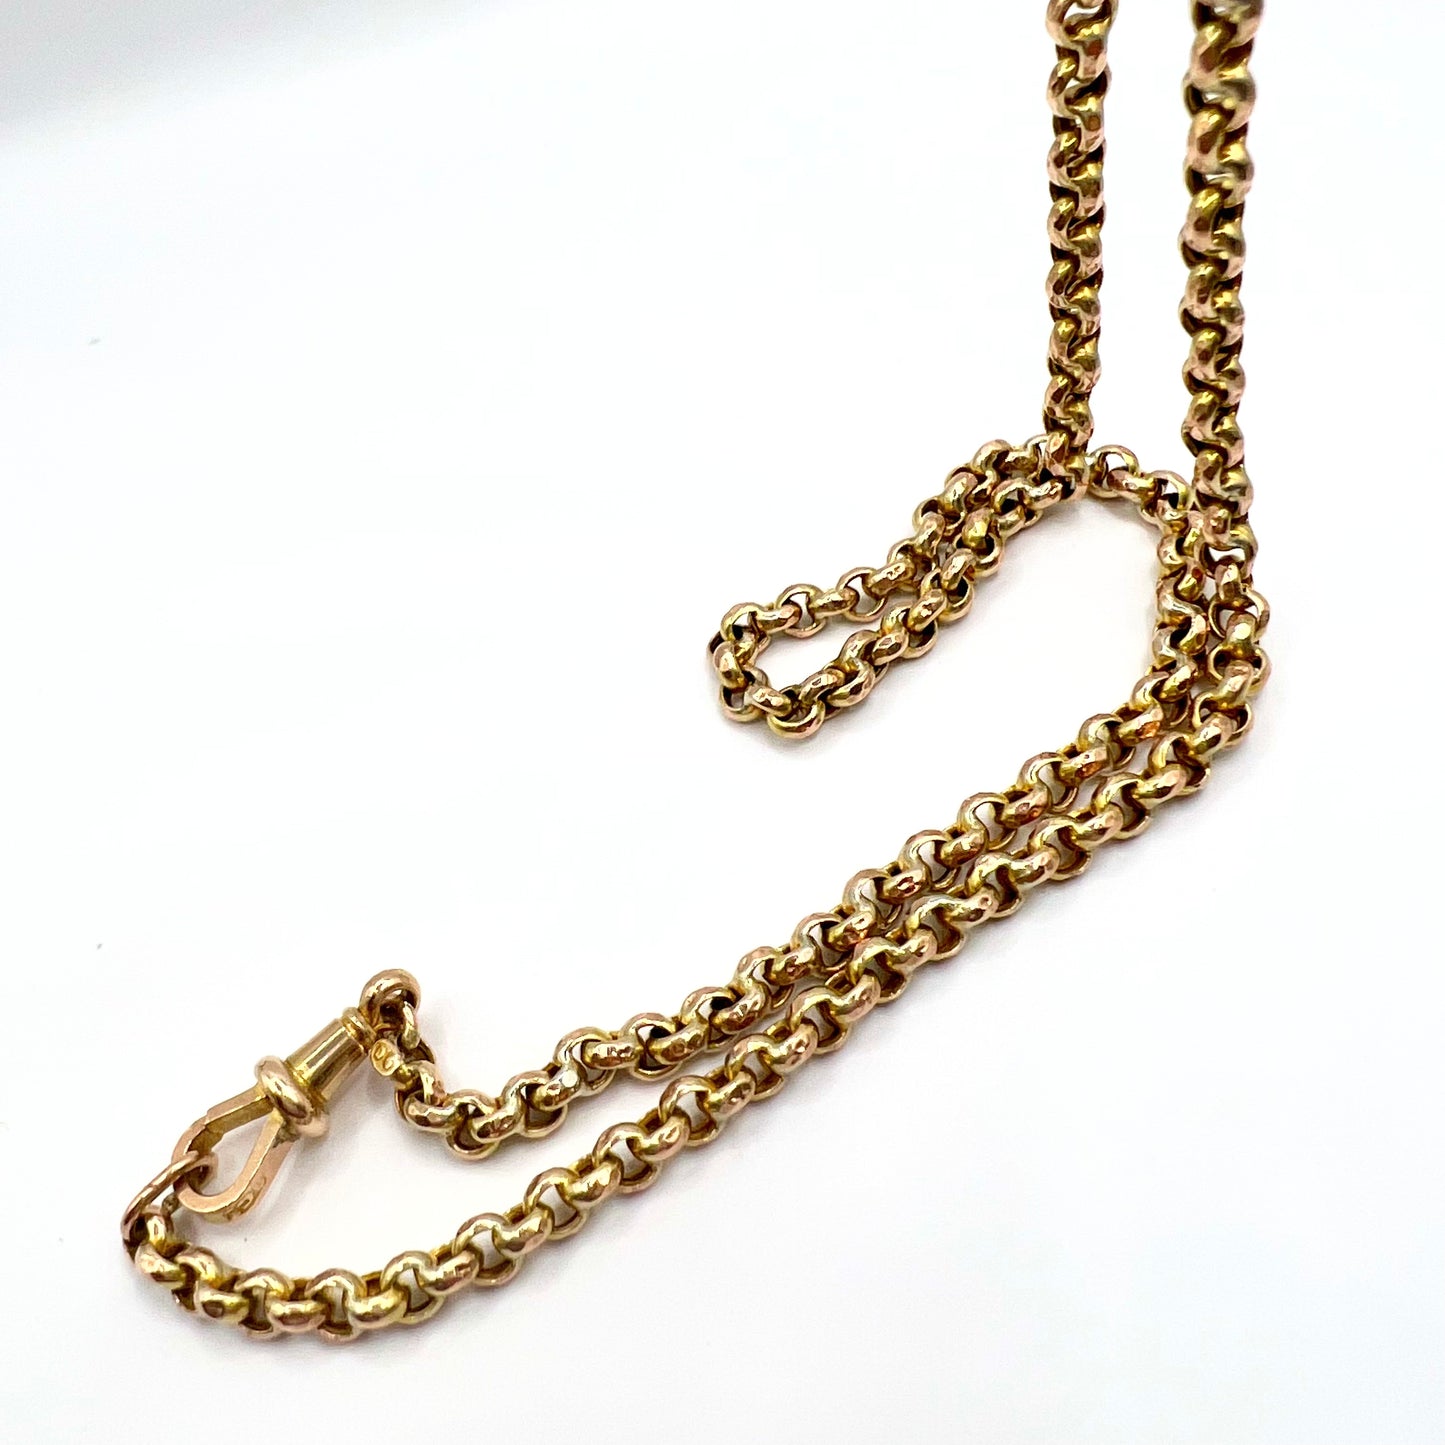 Long 9ct Solid Gold Victorian Belcher Chain Necklace with Dog Clip